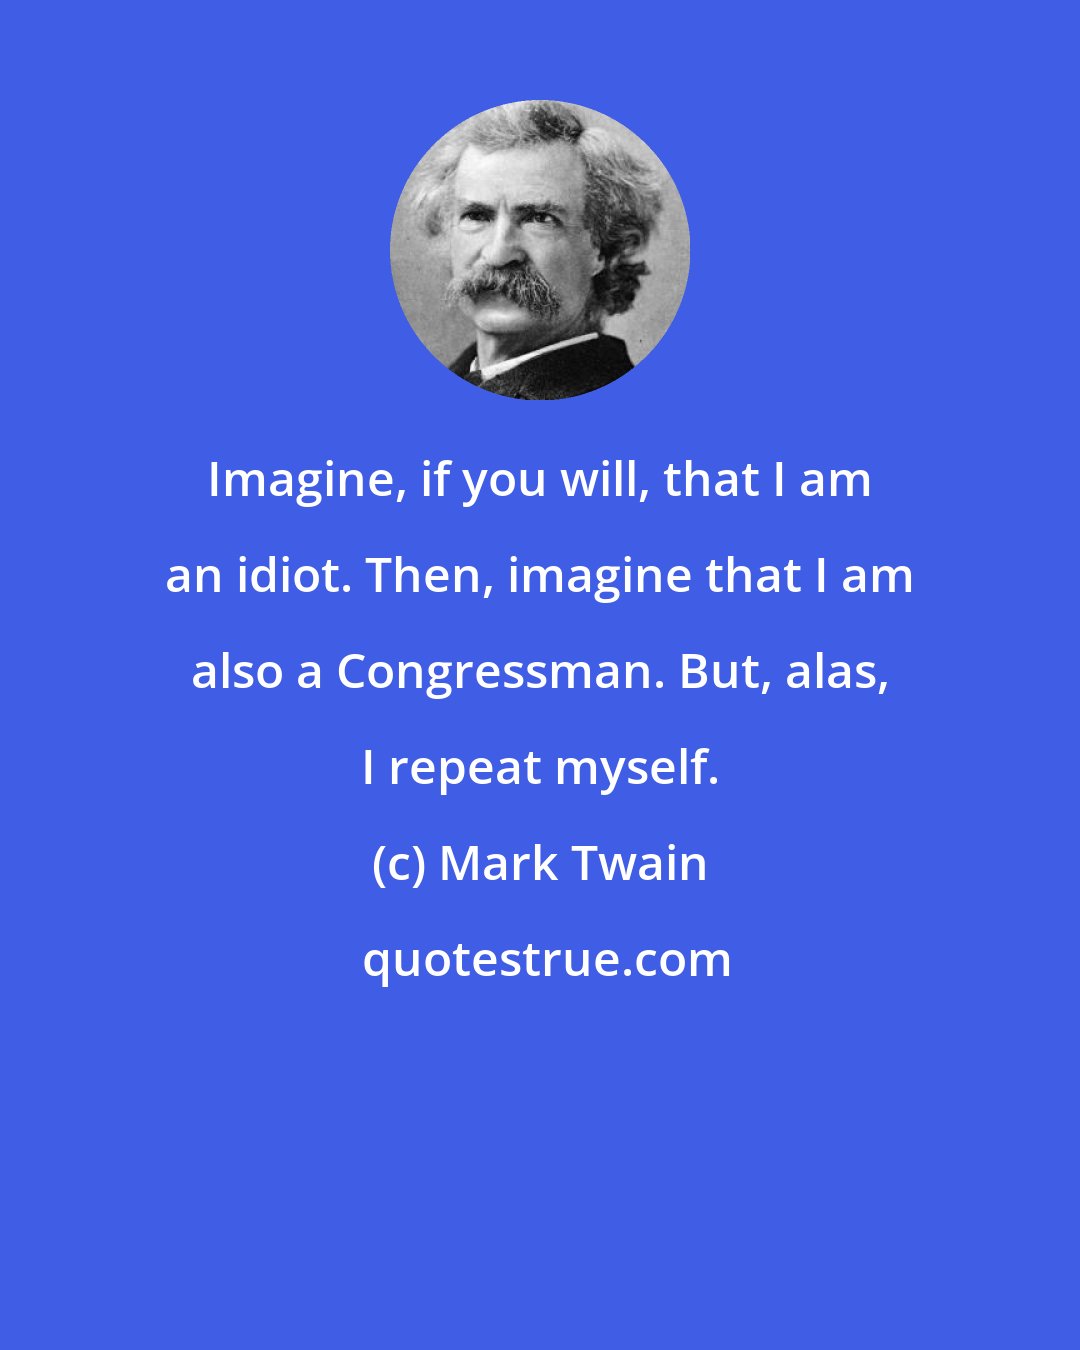 Mark Twain: Imagine, if you will, that I am an idiot. Then, imagine that I am also a Congressman. But, alas, I repeat myself.